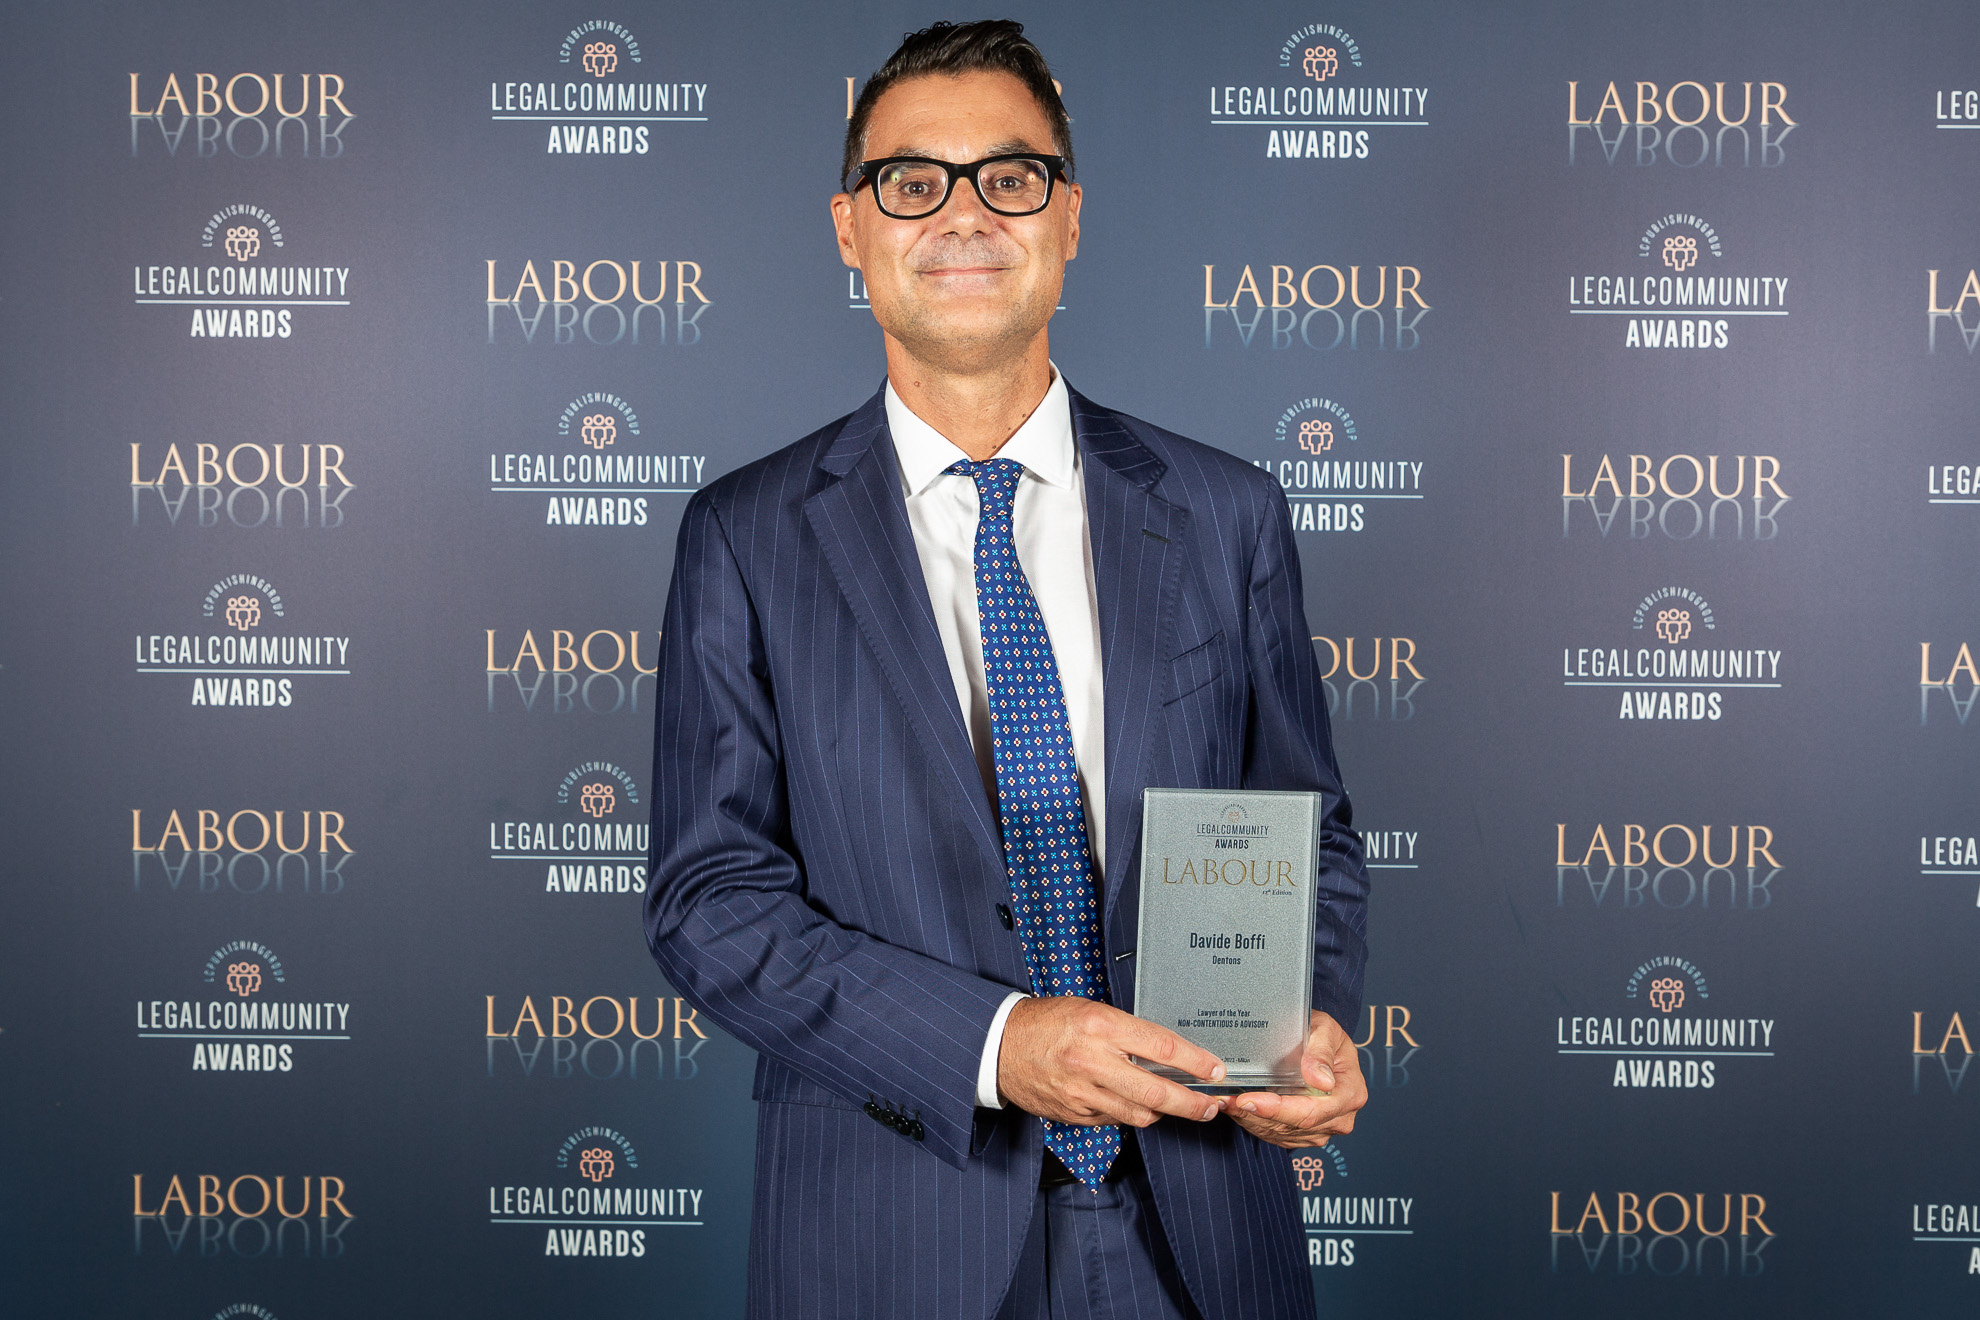 Davide Boffi was recognized as Lawyer of the Year non-contentious & advisory